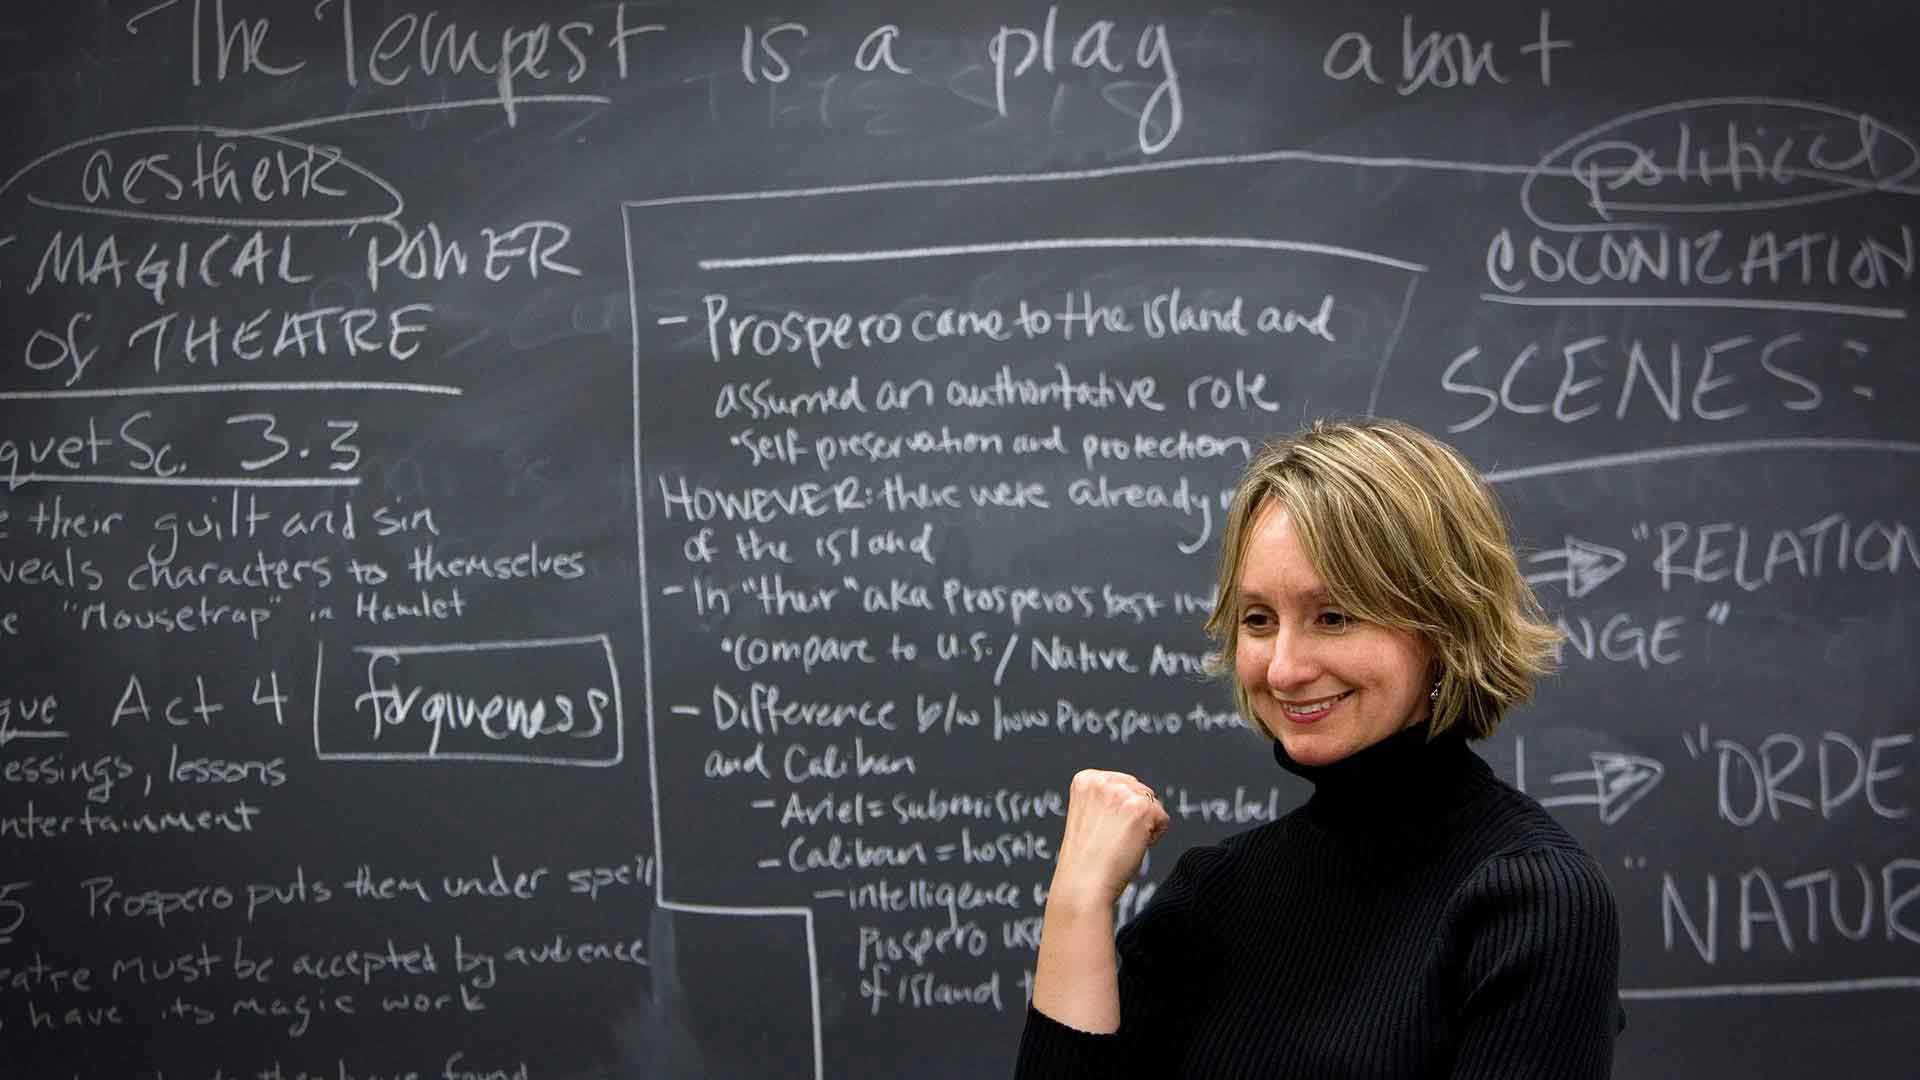 Dr. Amy Muse in front a chalkboard teaches a class on The Tempest